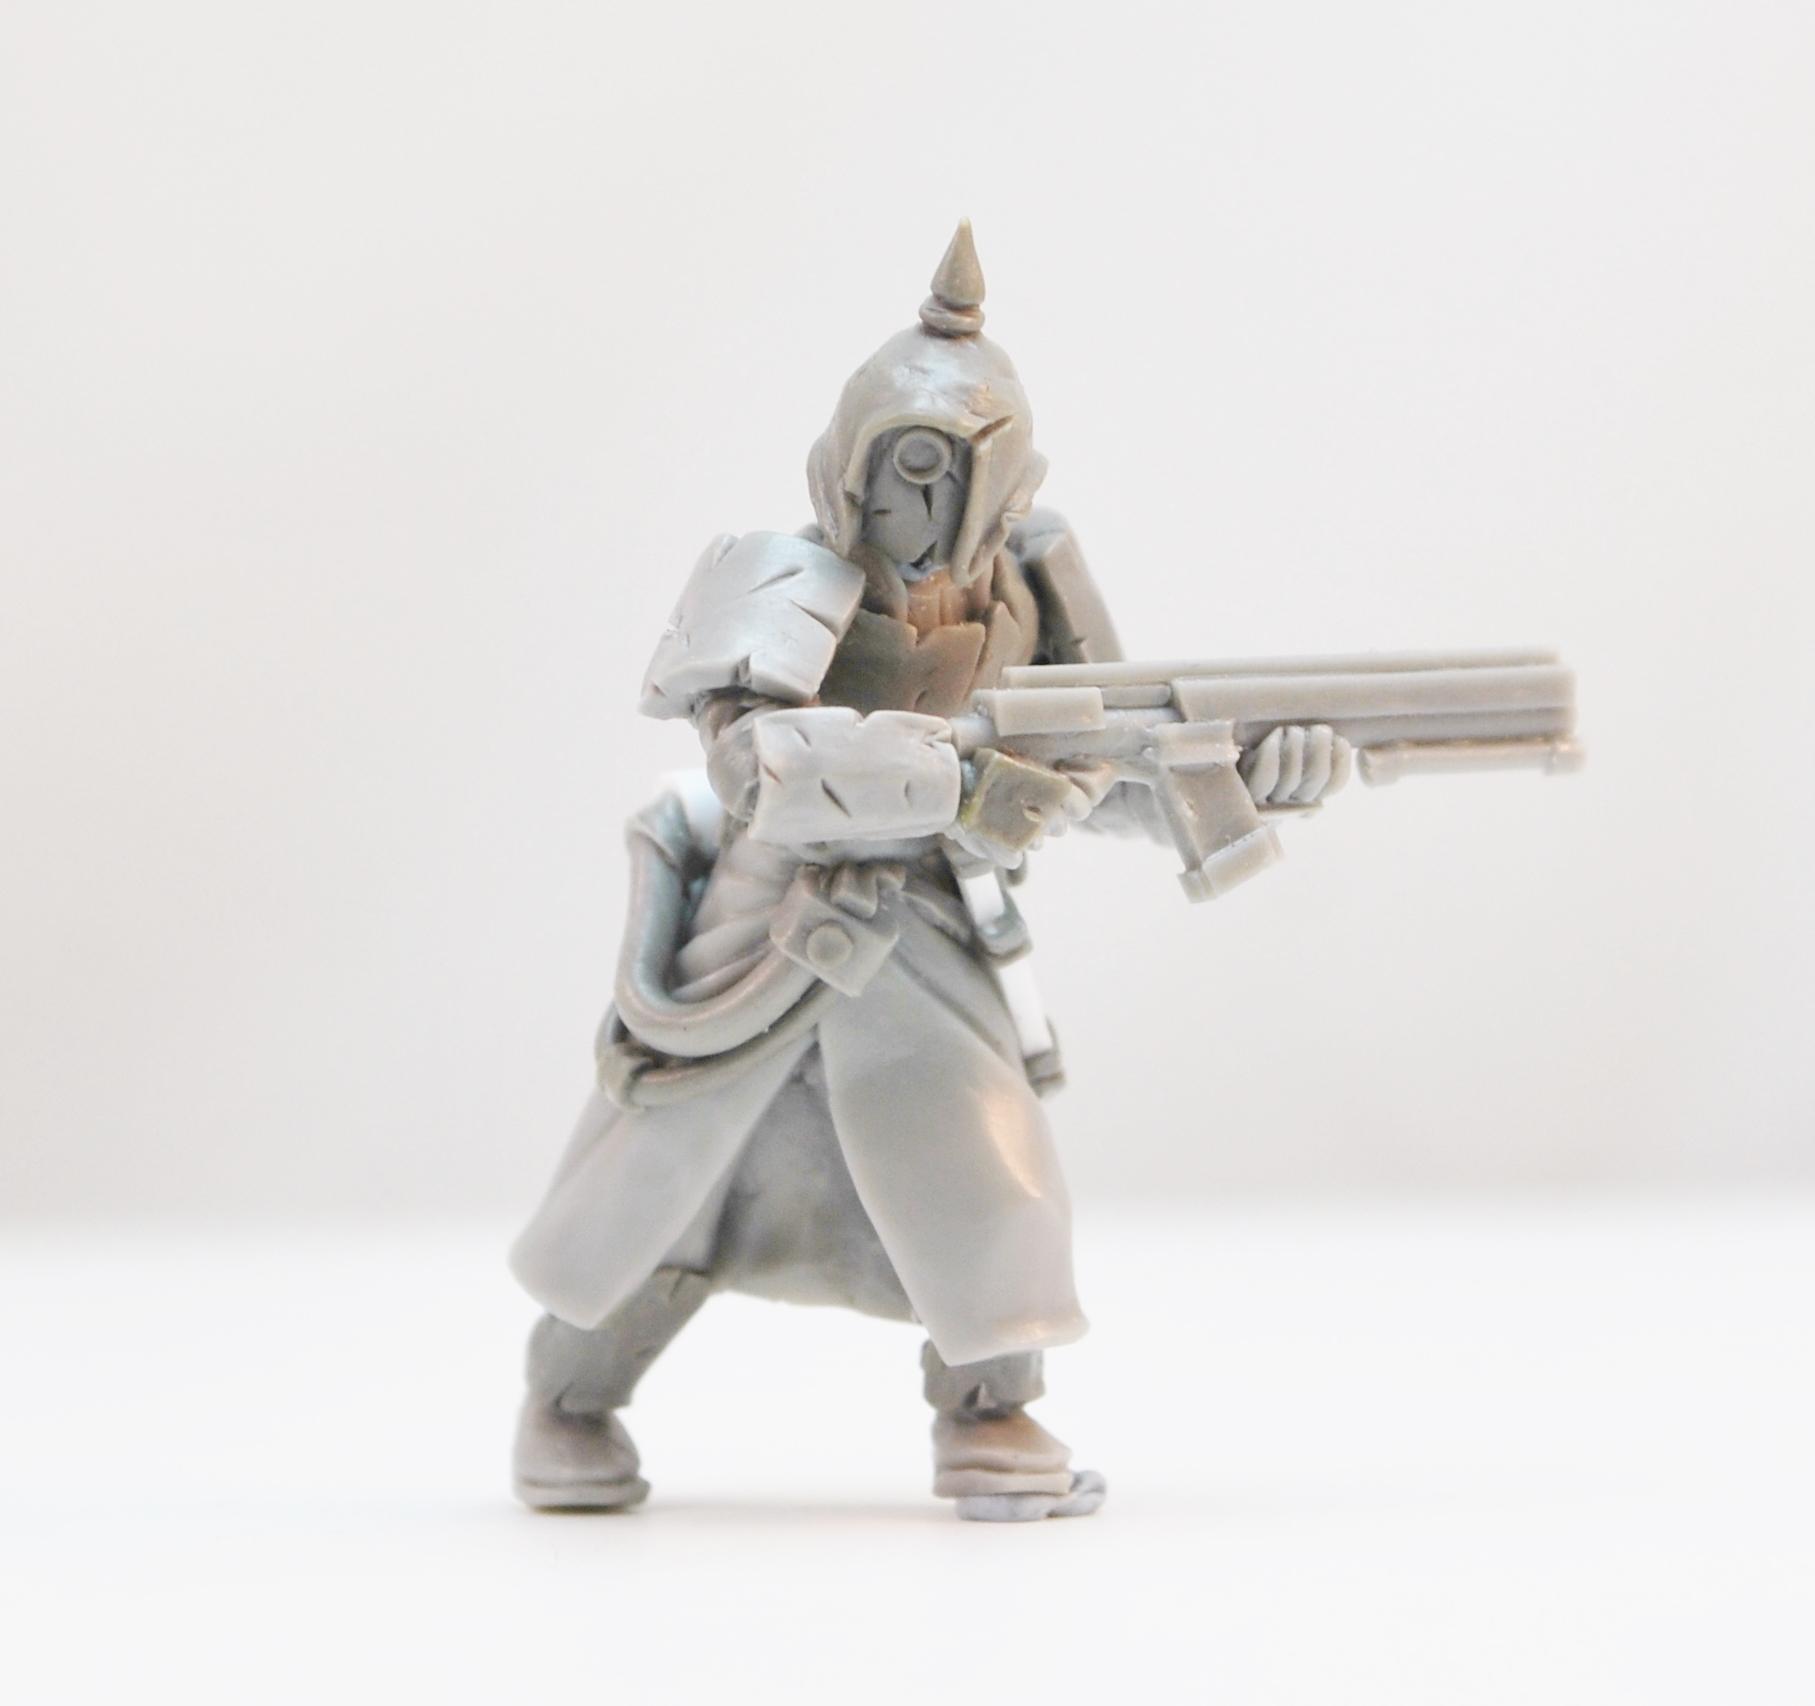 Miniatures Of The North, Tox Troopers